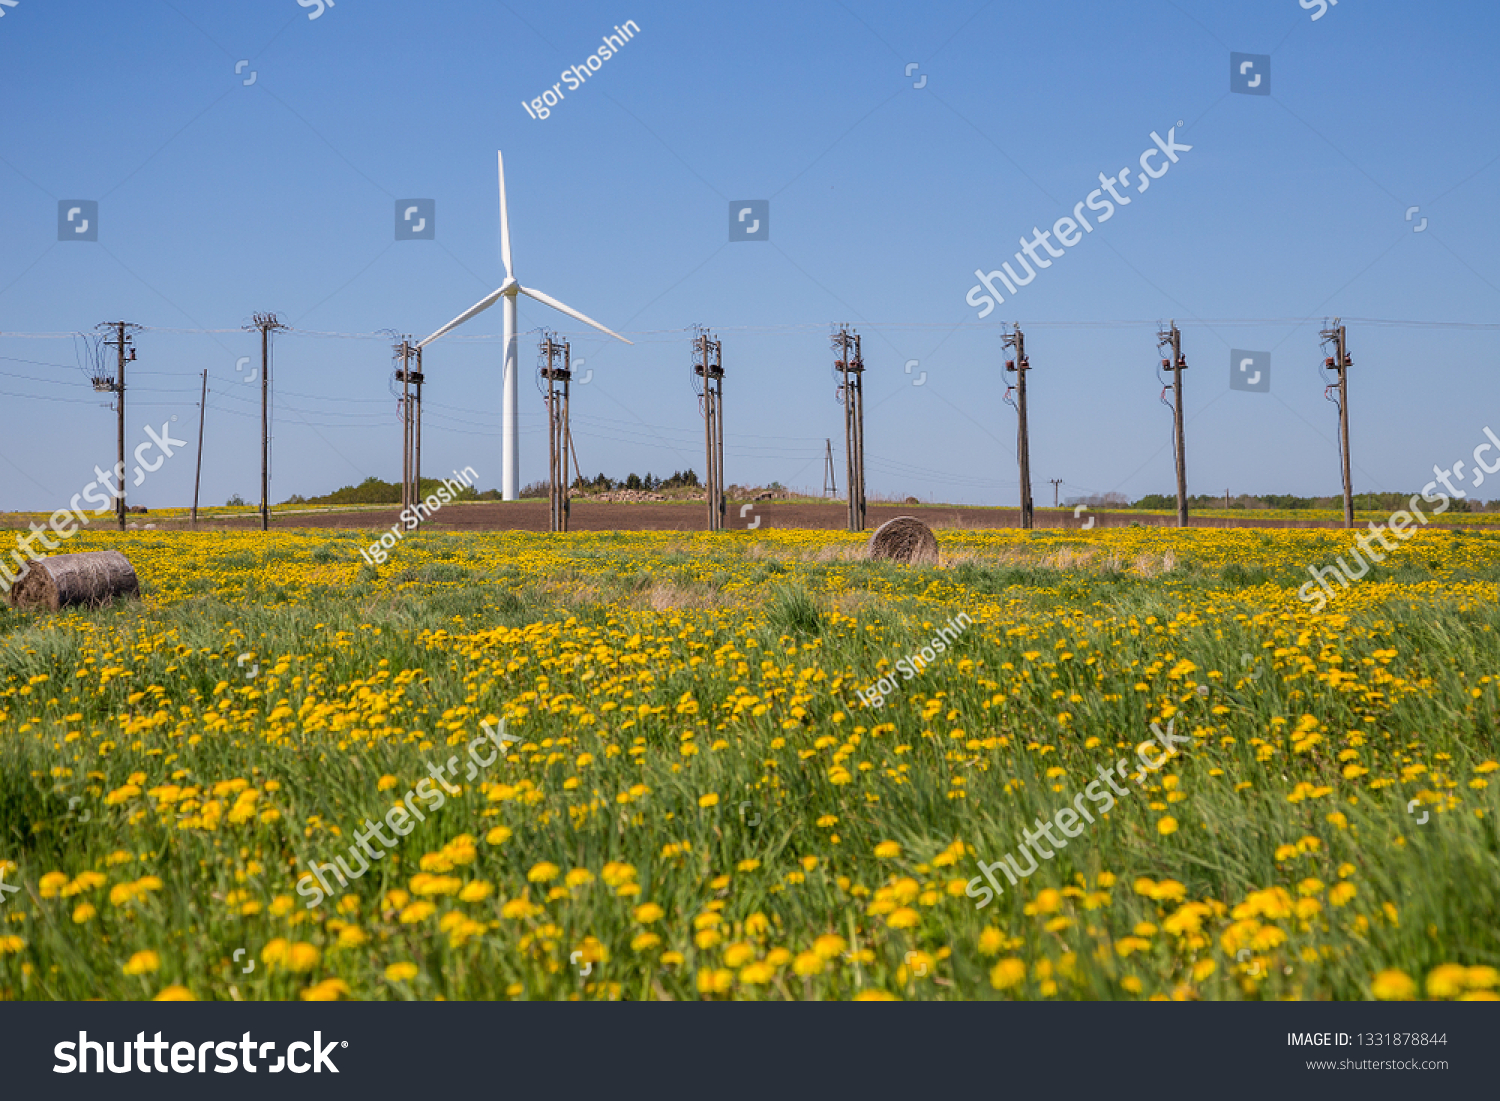 Wind turbines in a field in spring. A field of dandelions.
Poles for transportation of electricity. #1331878844